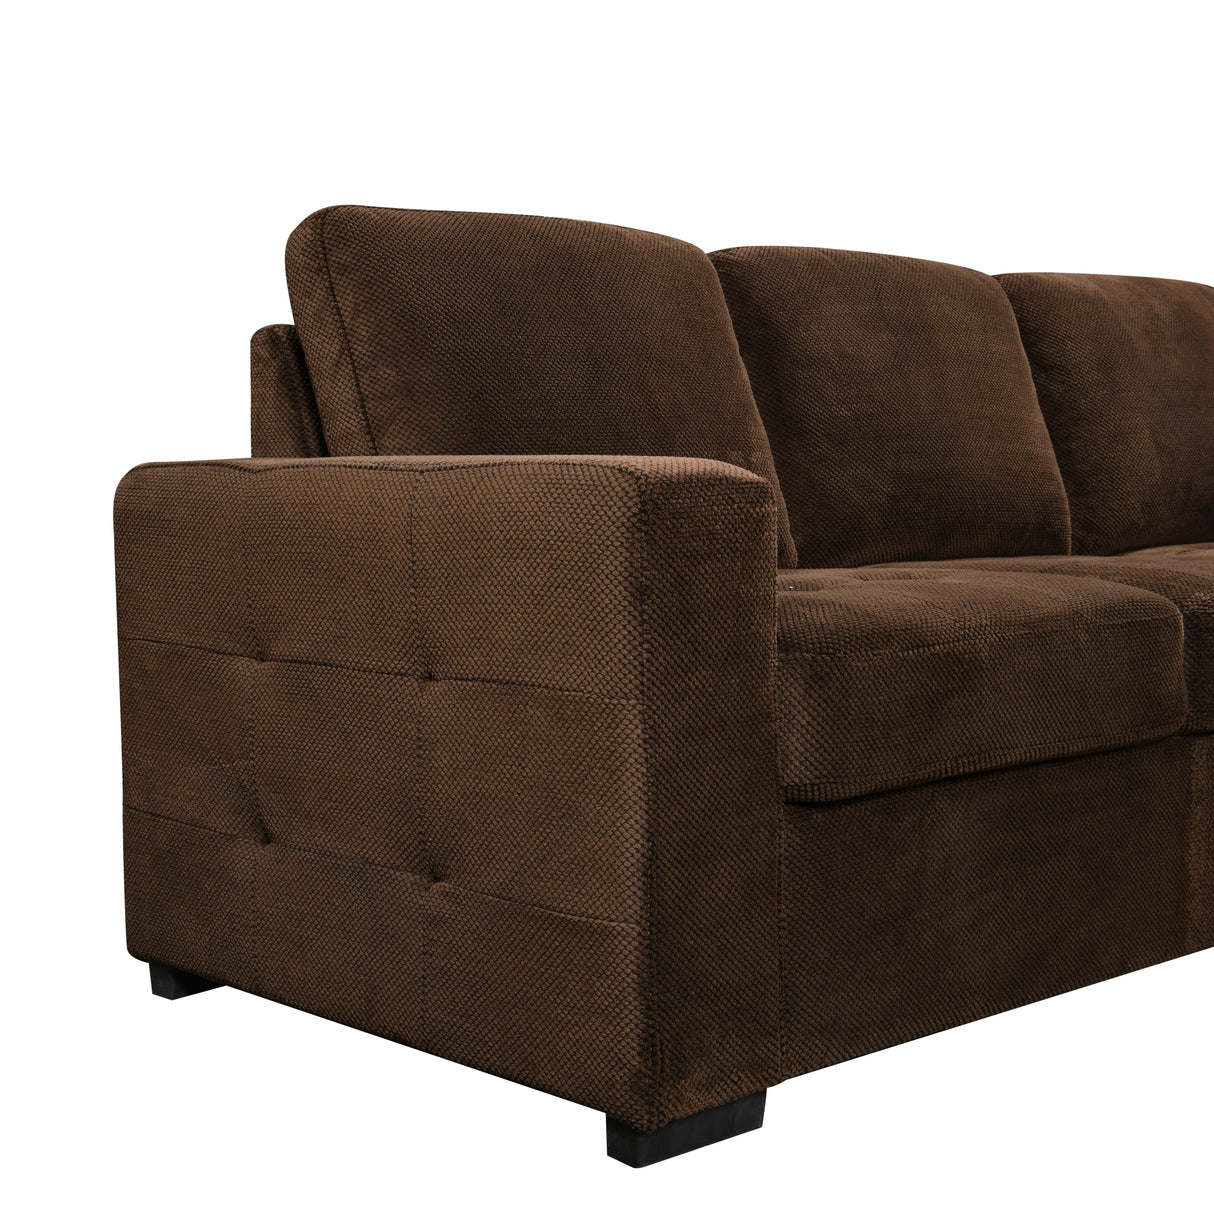 Sectional Sofa Couch,123 Oversized U Shaped Sectional Couch Set